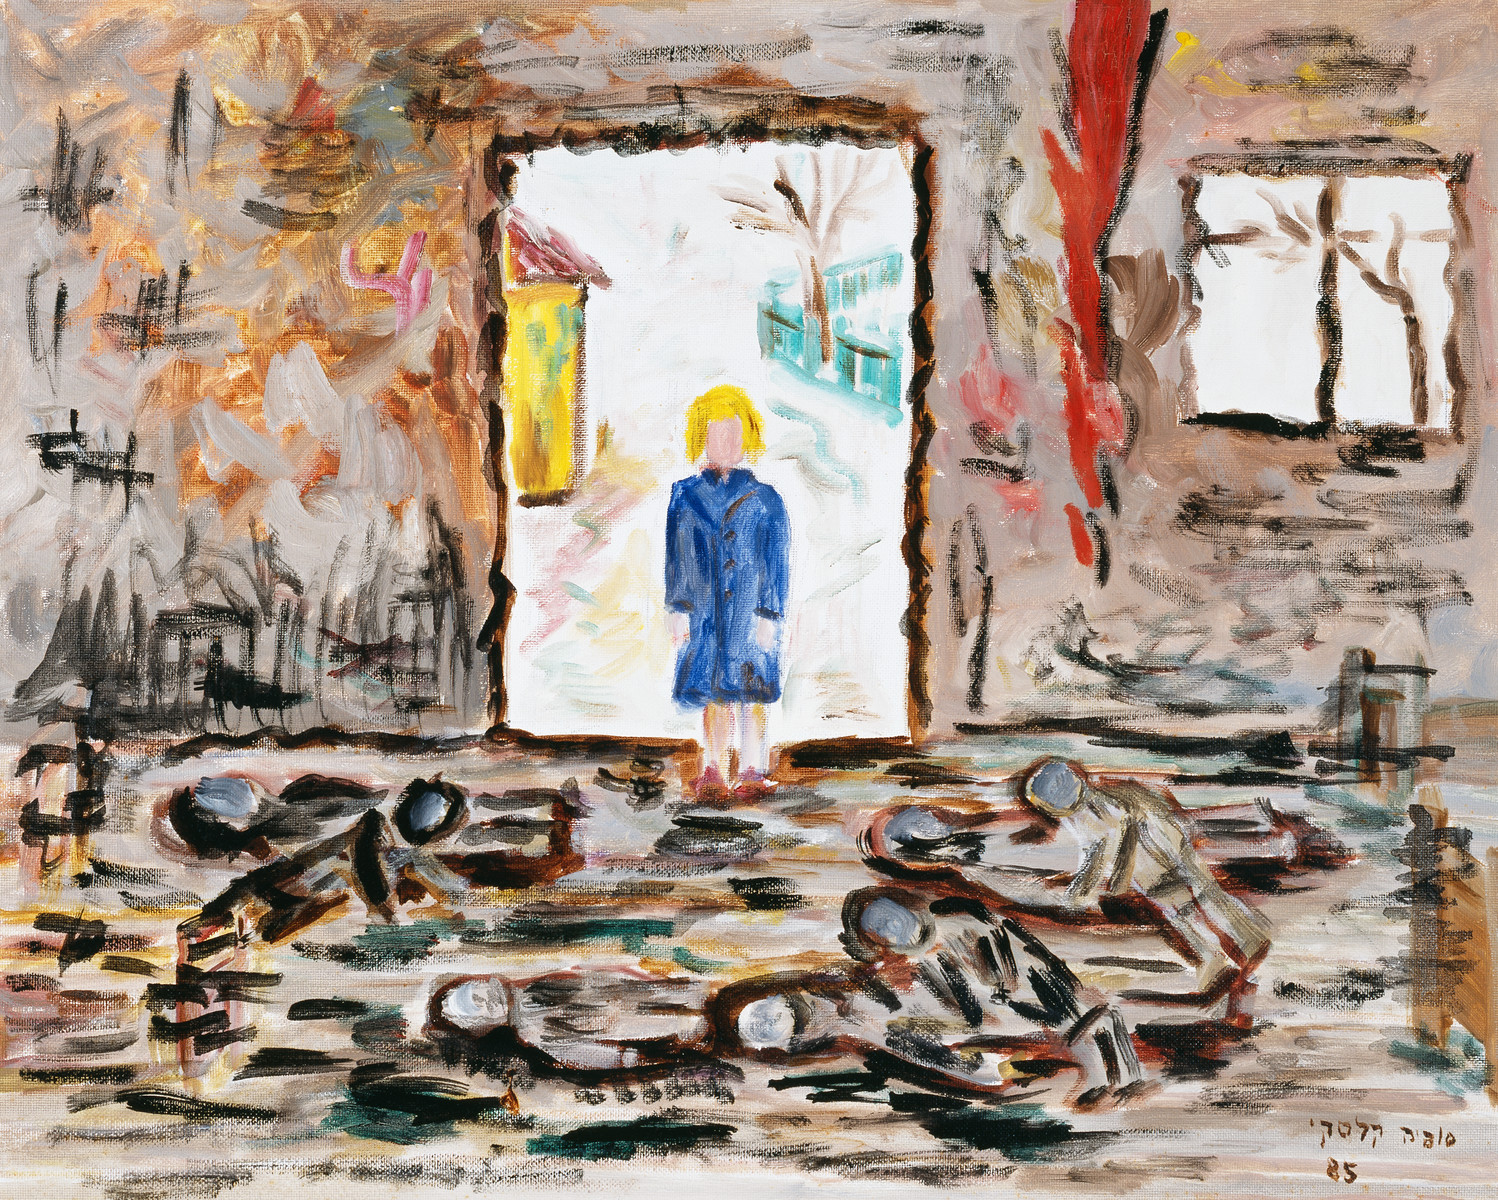 A painting by artist Sophia Kalski entitled "Death of the Martyrs." 

Oil painting created by Sophia Kalski in 1987 about her life as a 9 year girl in the ghetto in Lwow, Poland (L’viv, Ukraine), from summer 1942 to March 1943.  It depicts a young girl standing near a circle of burned bodies in front of a brightly lit doorway. 

The artist writes "In the beginning of January 1943, there was an aktion in the Lwow ghetto in a house near us. He decided to die and not to be caught by the Germans. All the entrances to the building were sealed and they didn't let the Germans enter. The Germans set the house on fire with all the people inside."